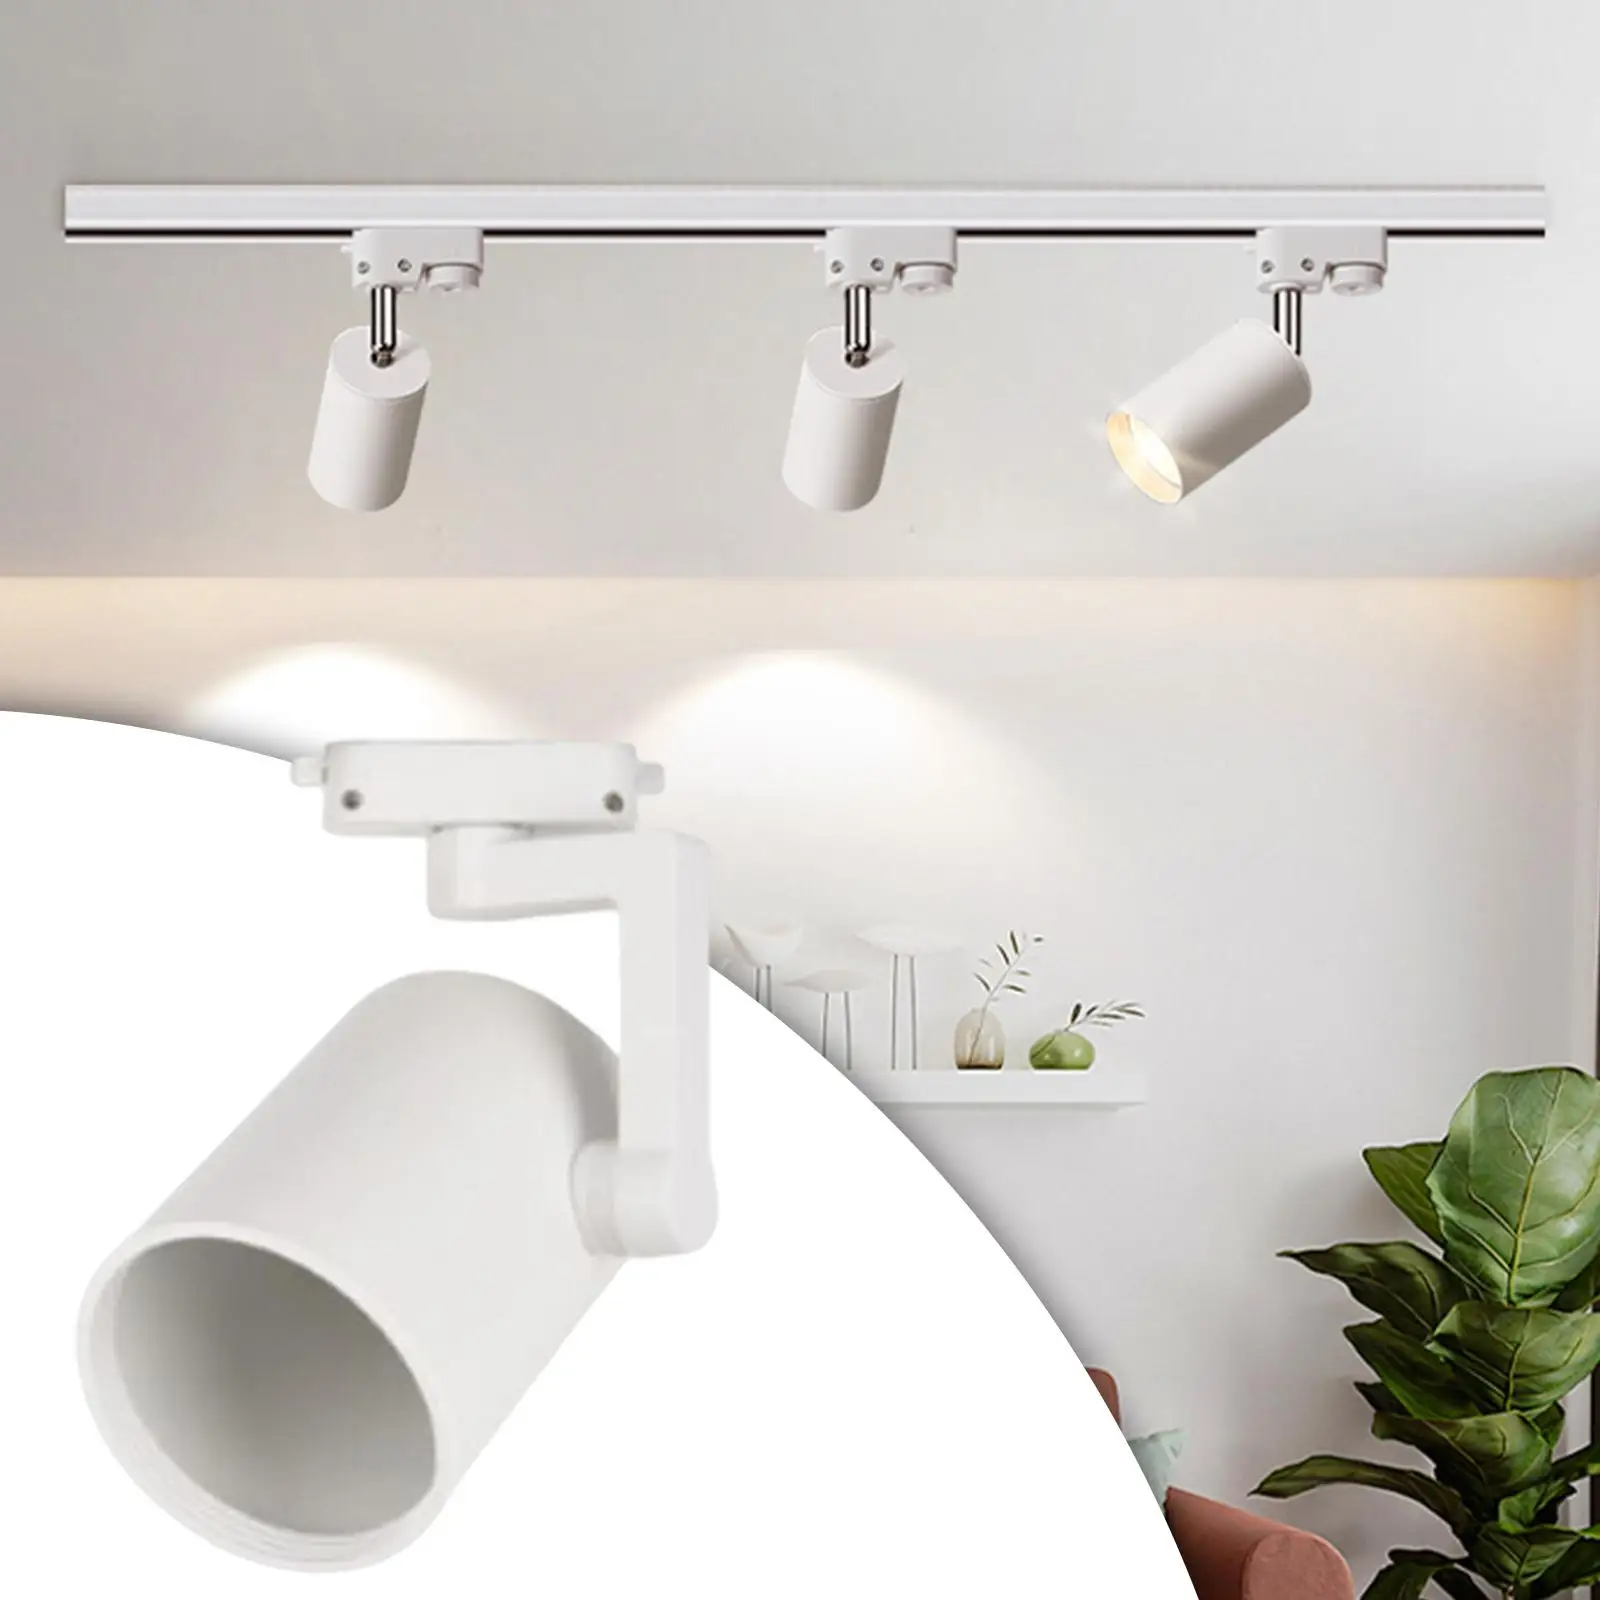 Par30 LED Track Light Shade Cover Bracket E27 White Scratch Resistant Accessories for Living Room Professional Lightweight